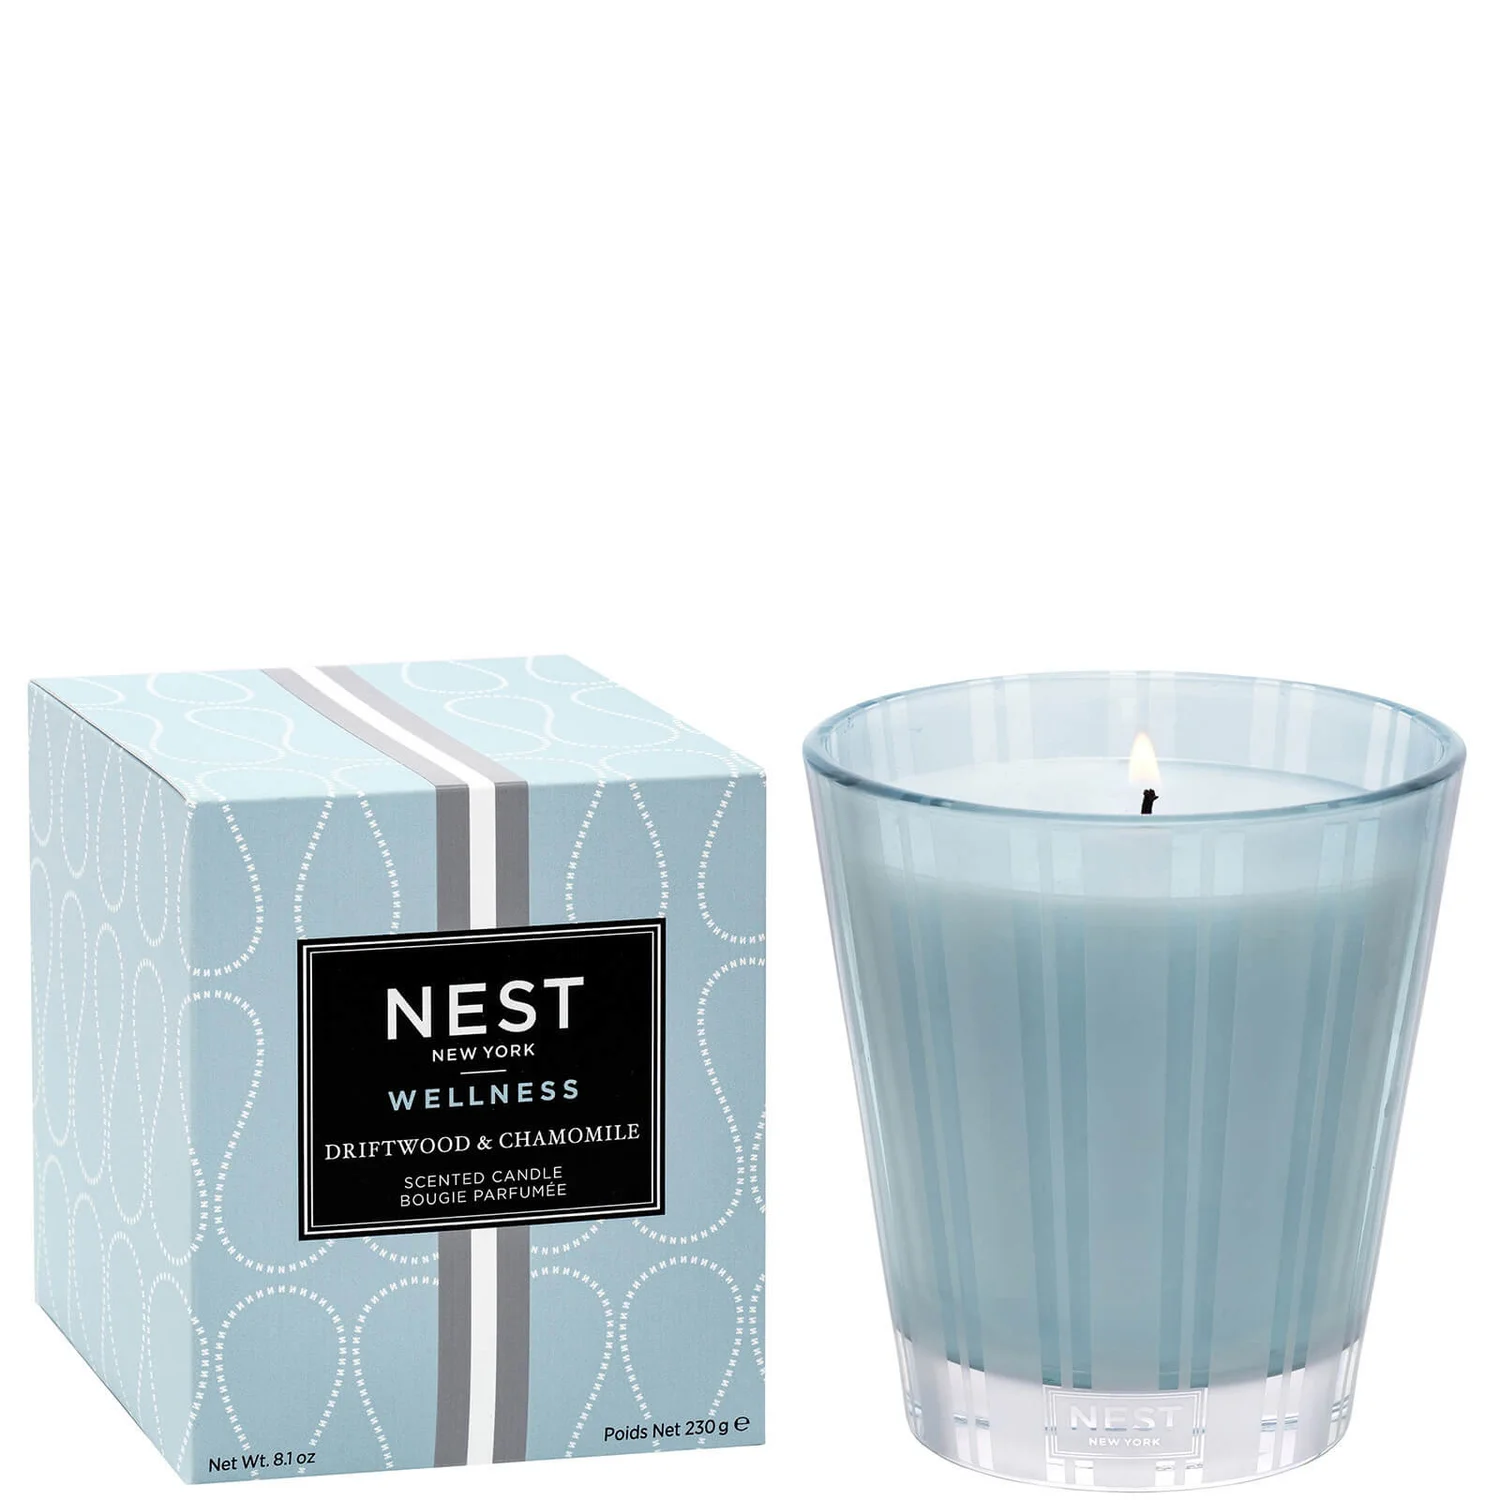 cultbeauty.co.uk | NEST New York Driftwood and Chamomile Scented Candle 230g